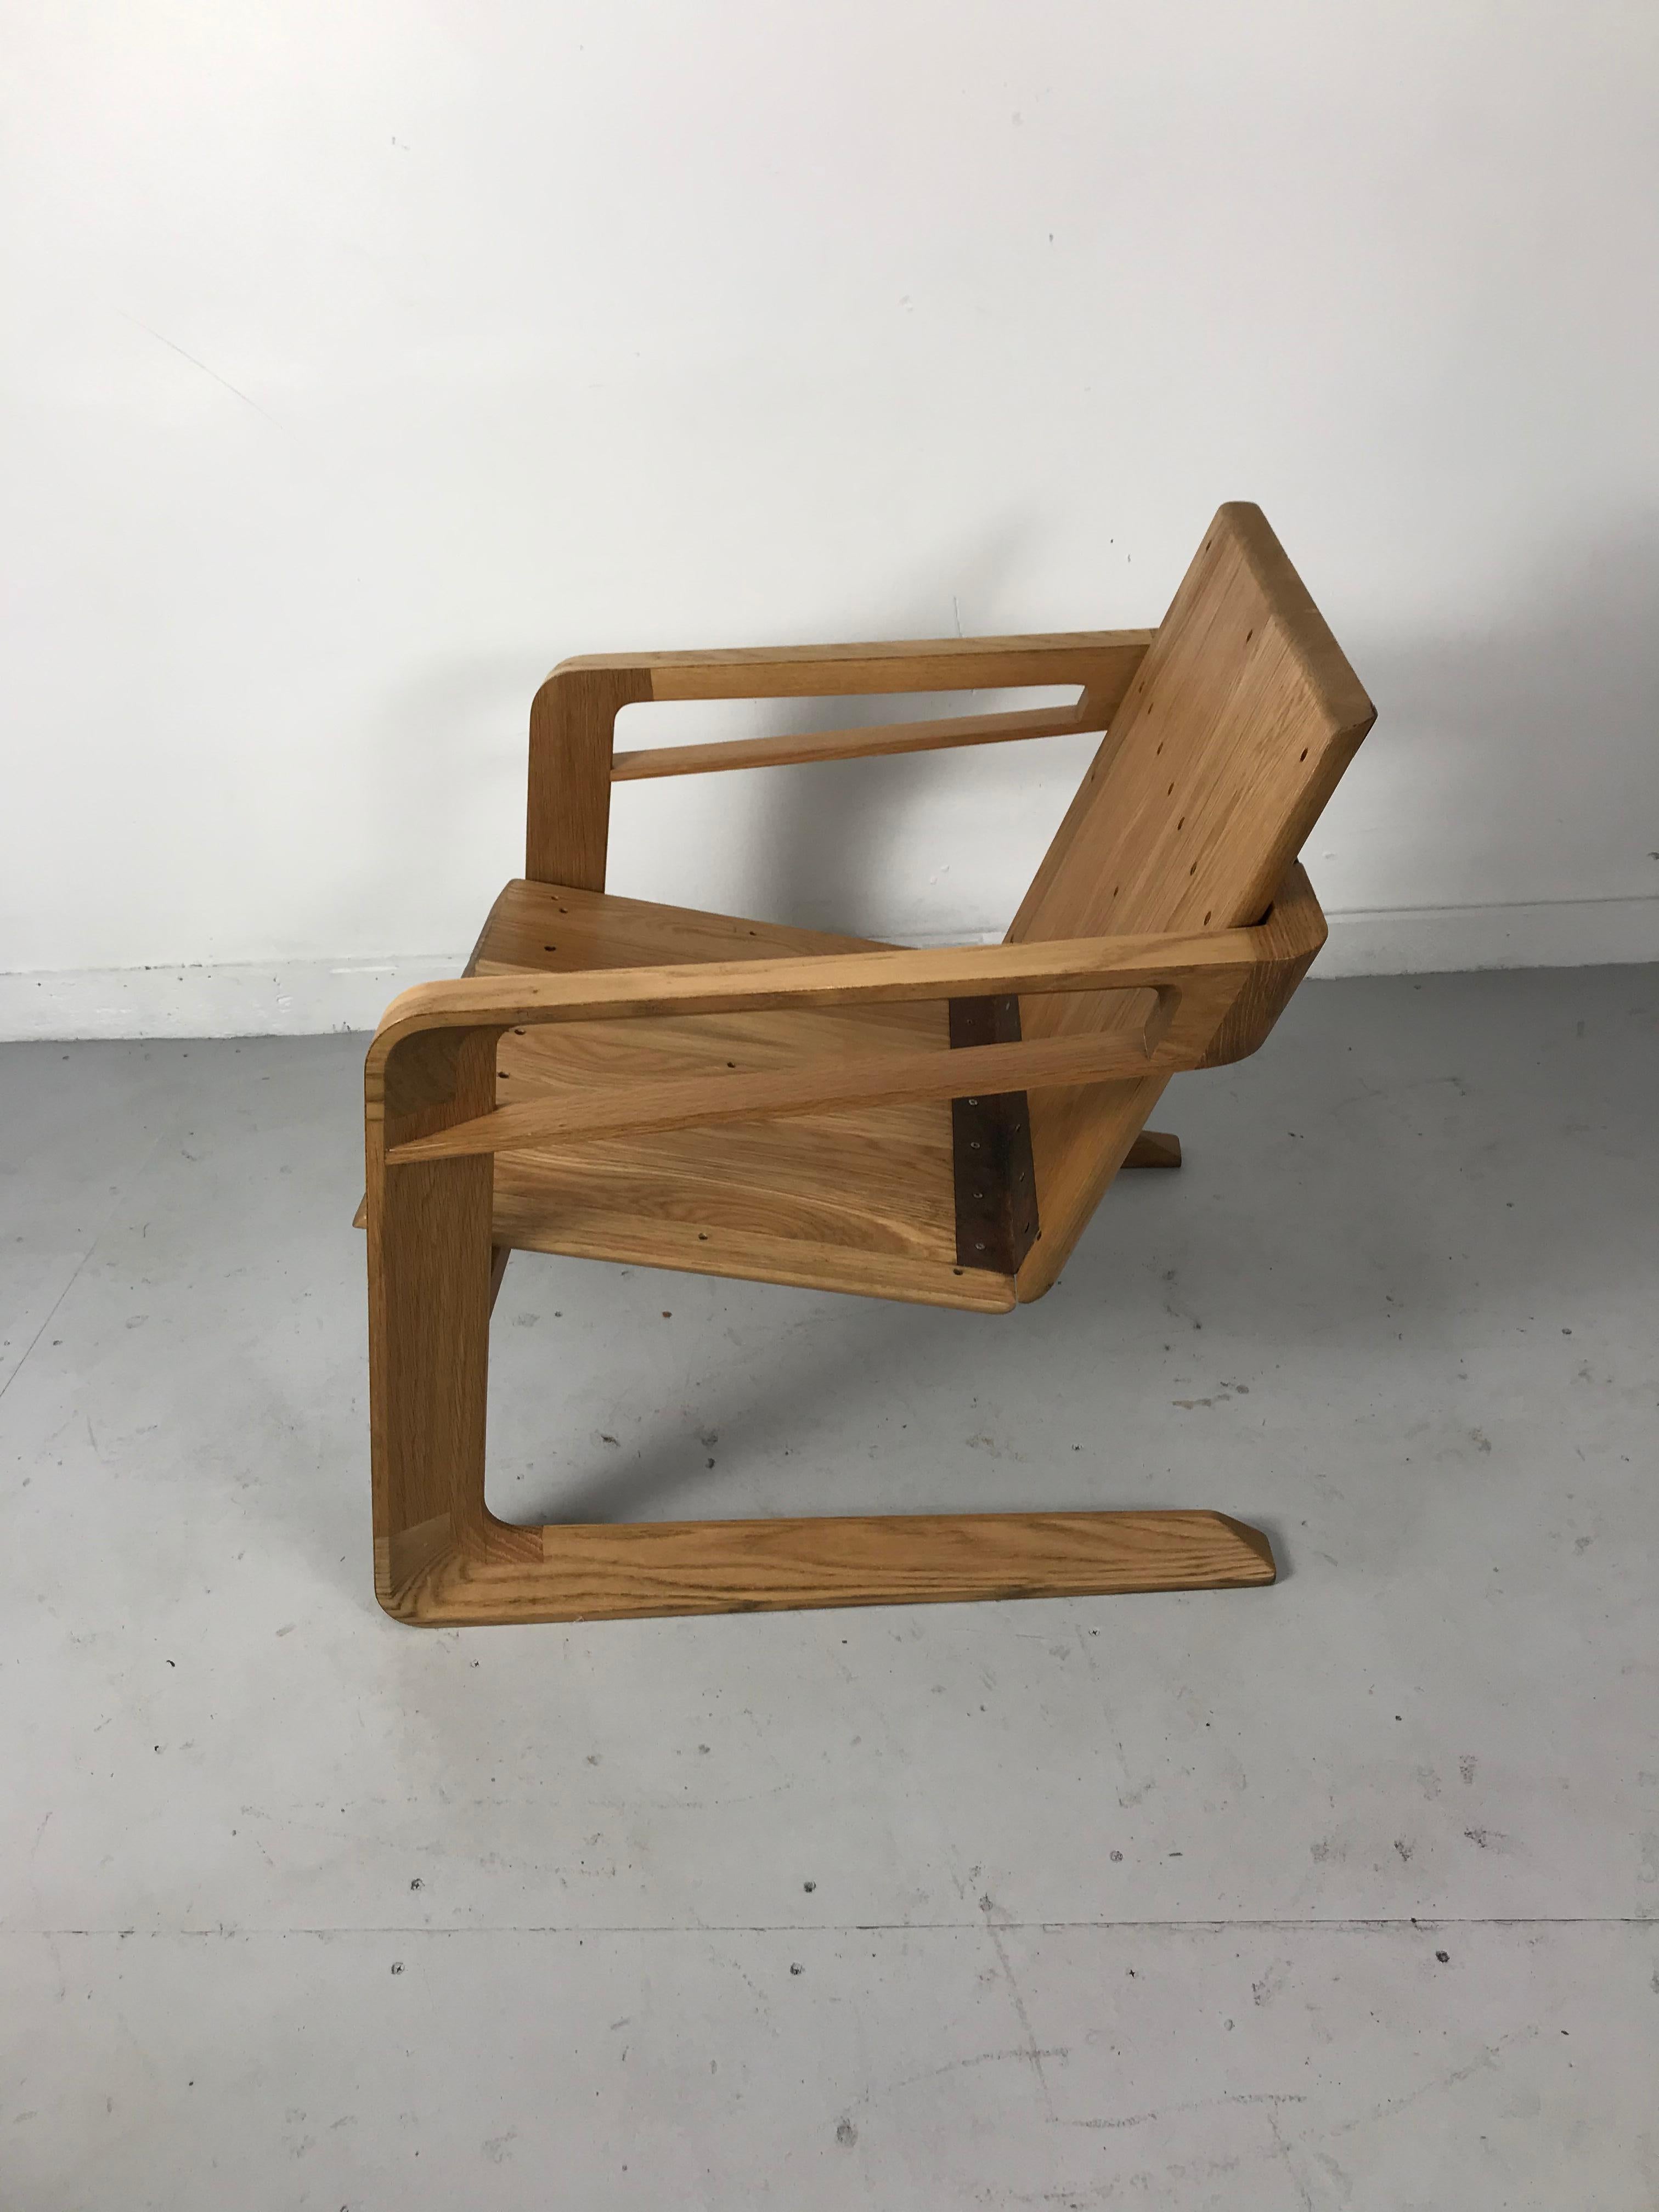 Cory Grosser 009 Airline Chair, After Famed 1934 Airline Chair by Kem Weber In Good Condition For Sale In Buffalo, NY